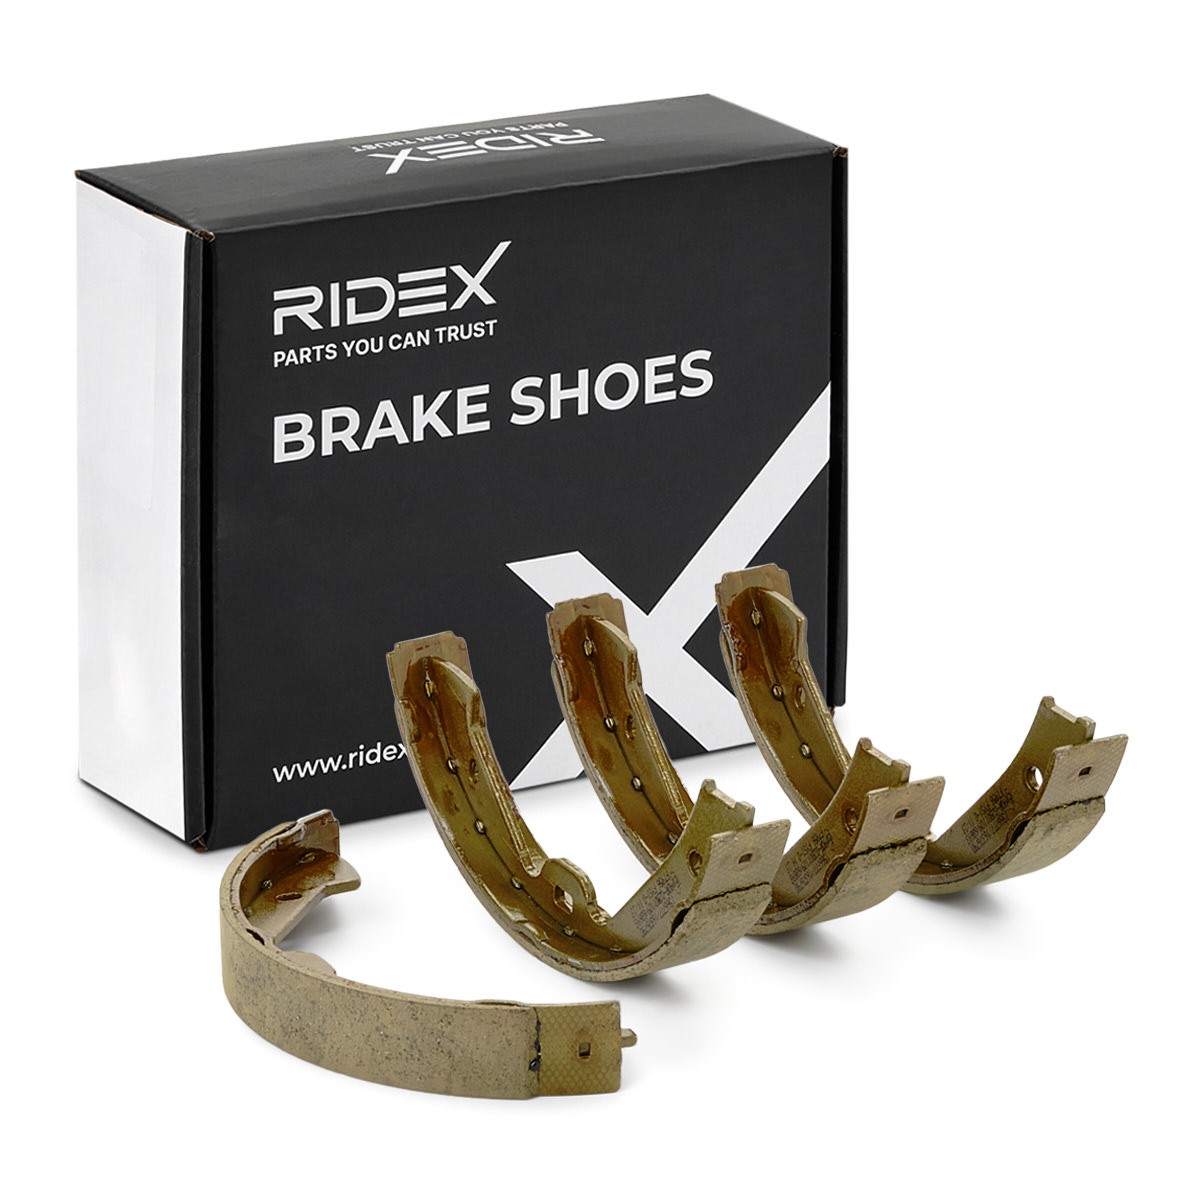 RIDEX 70B0411 Brake Shoe Set Rear Axle, 210, without handbrake lever, with accessories